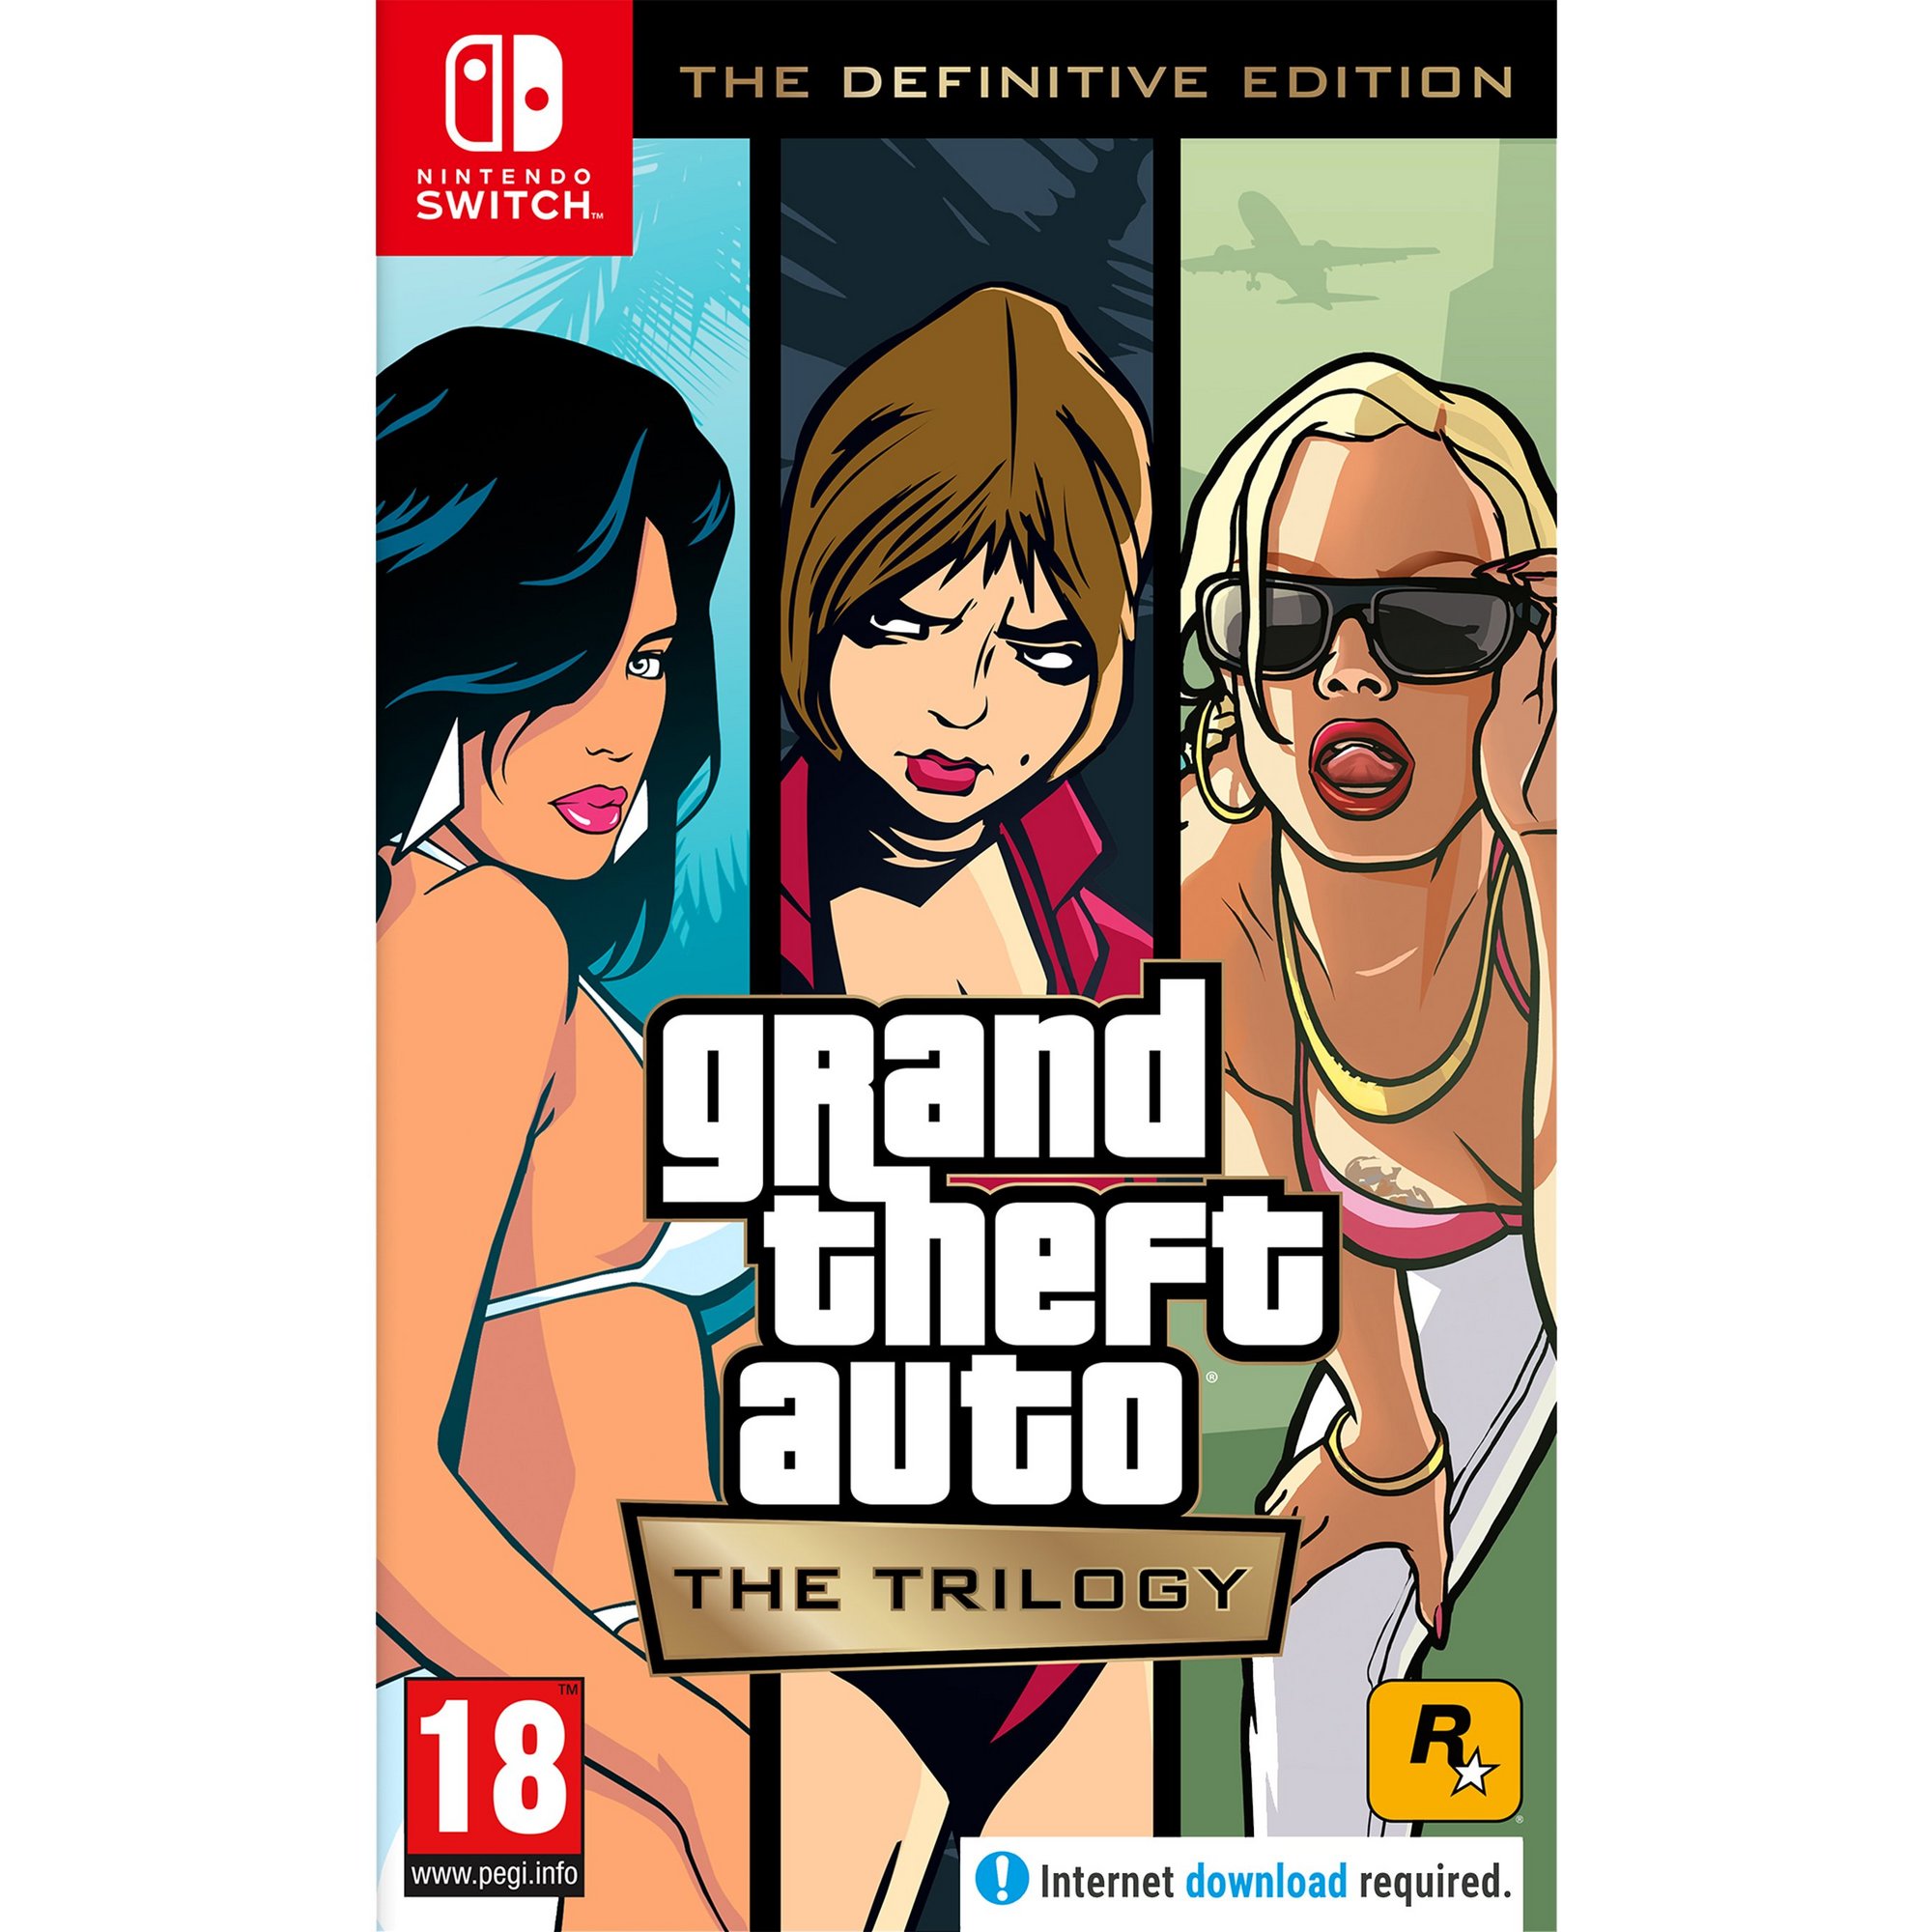 Nintendo Switch: Grand Theft Auto: The Trilogy - Definitive Edition